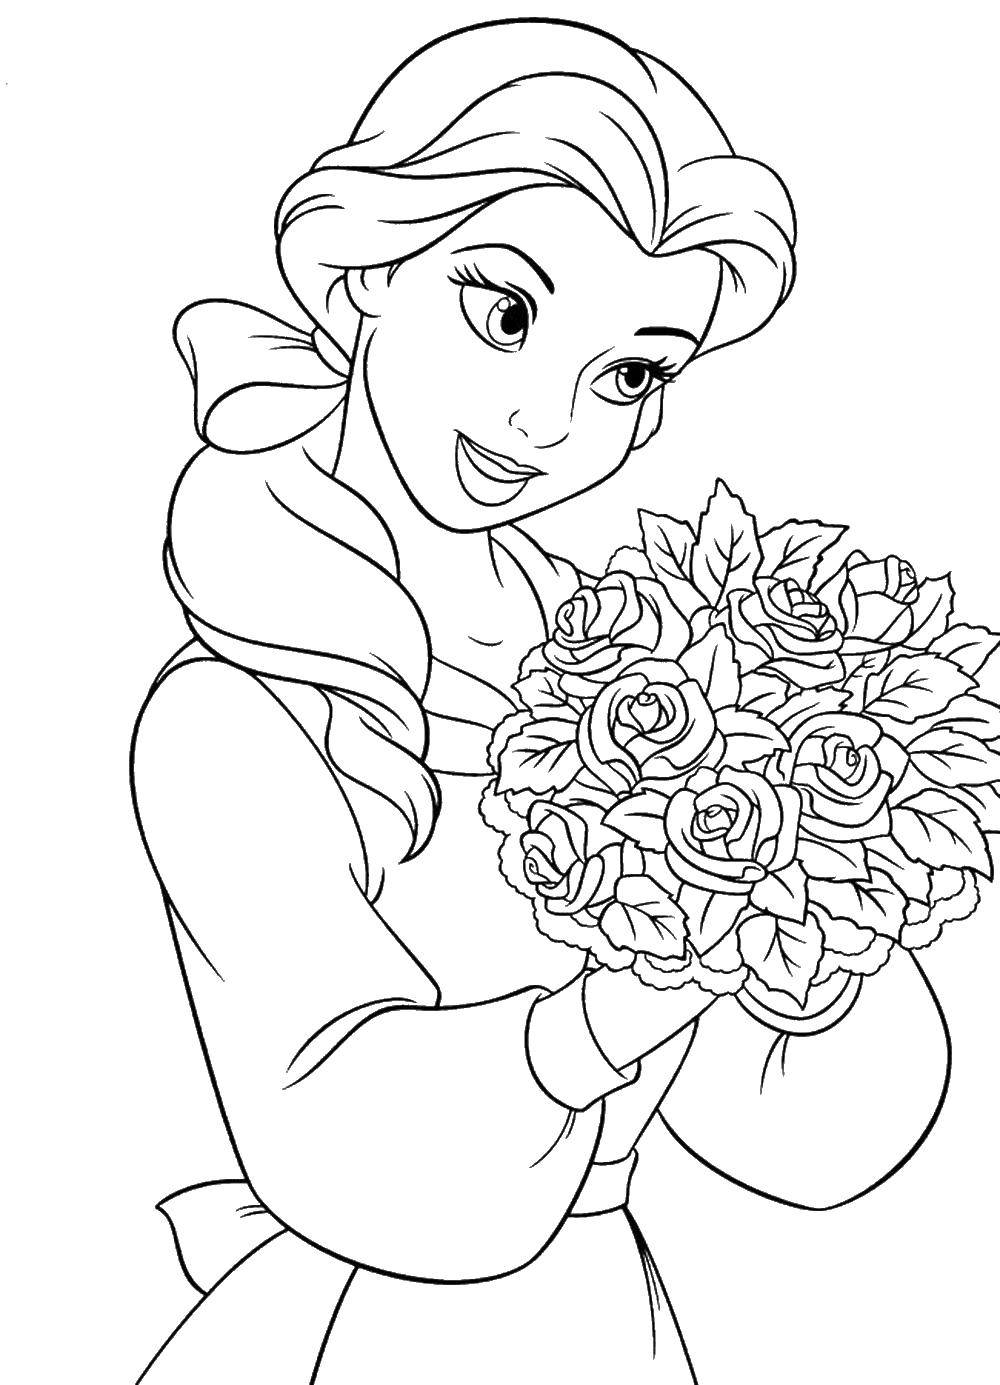 Coloring Princess with a bouquet. Category For girls. Tags:  Princess , bouquet, cartoon.